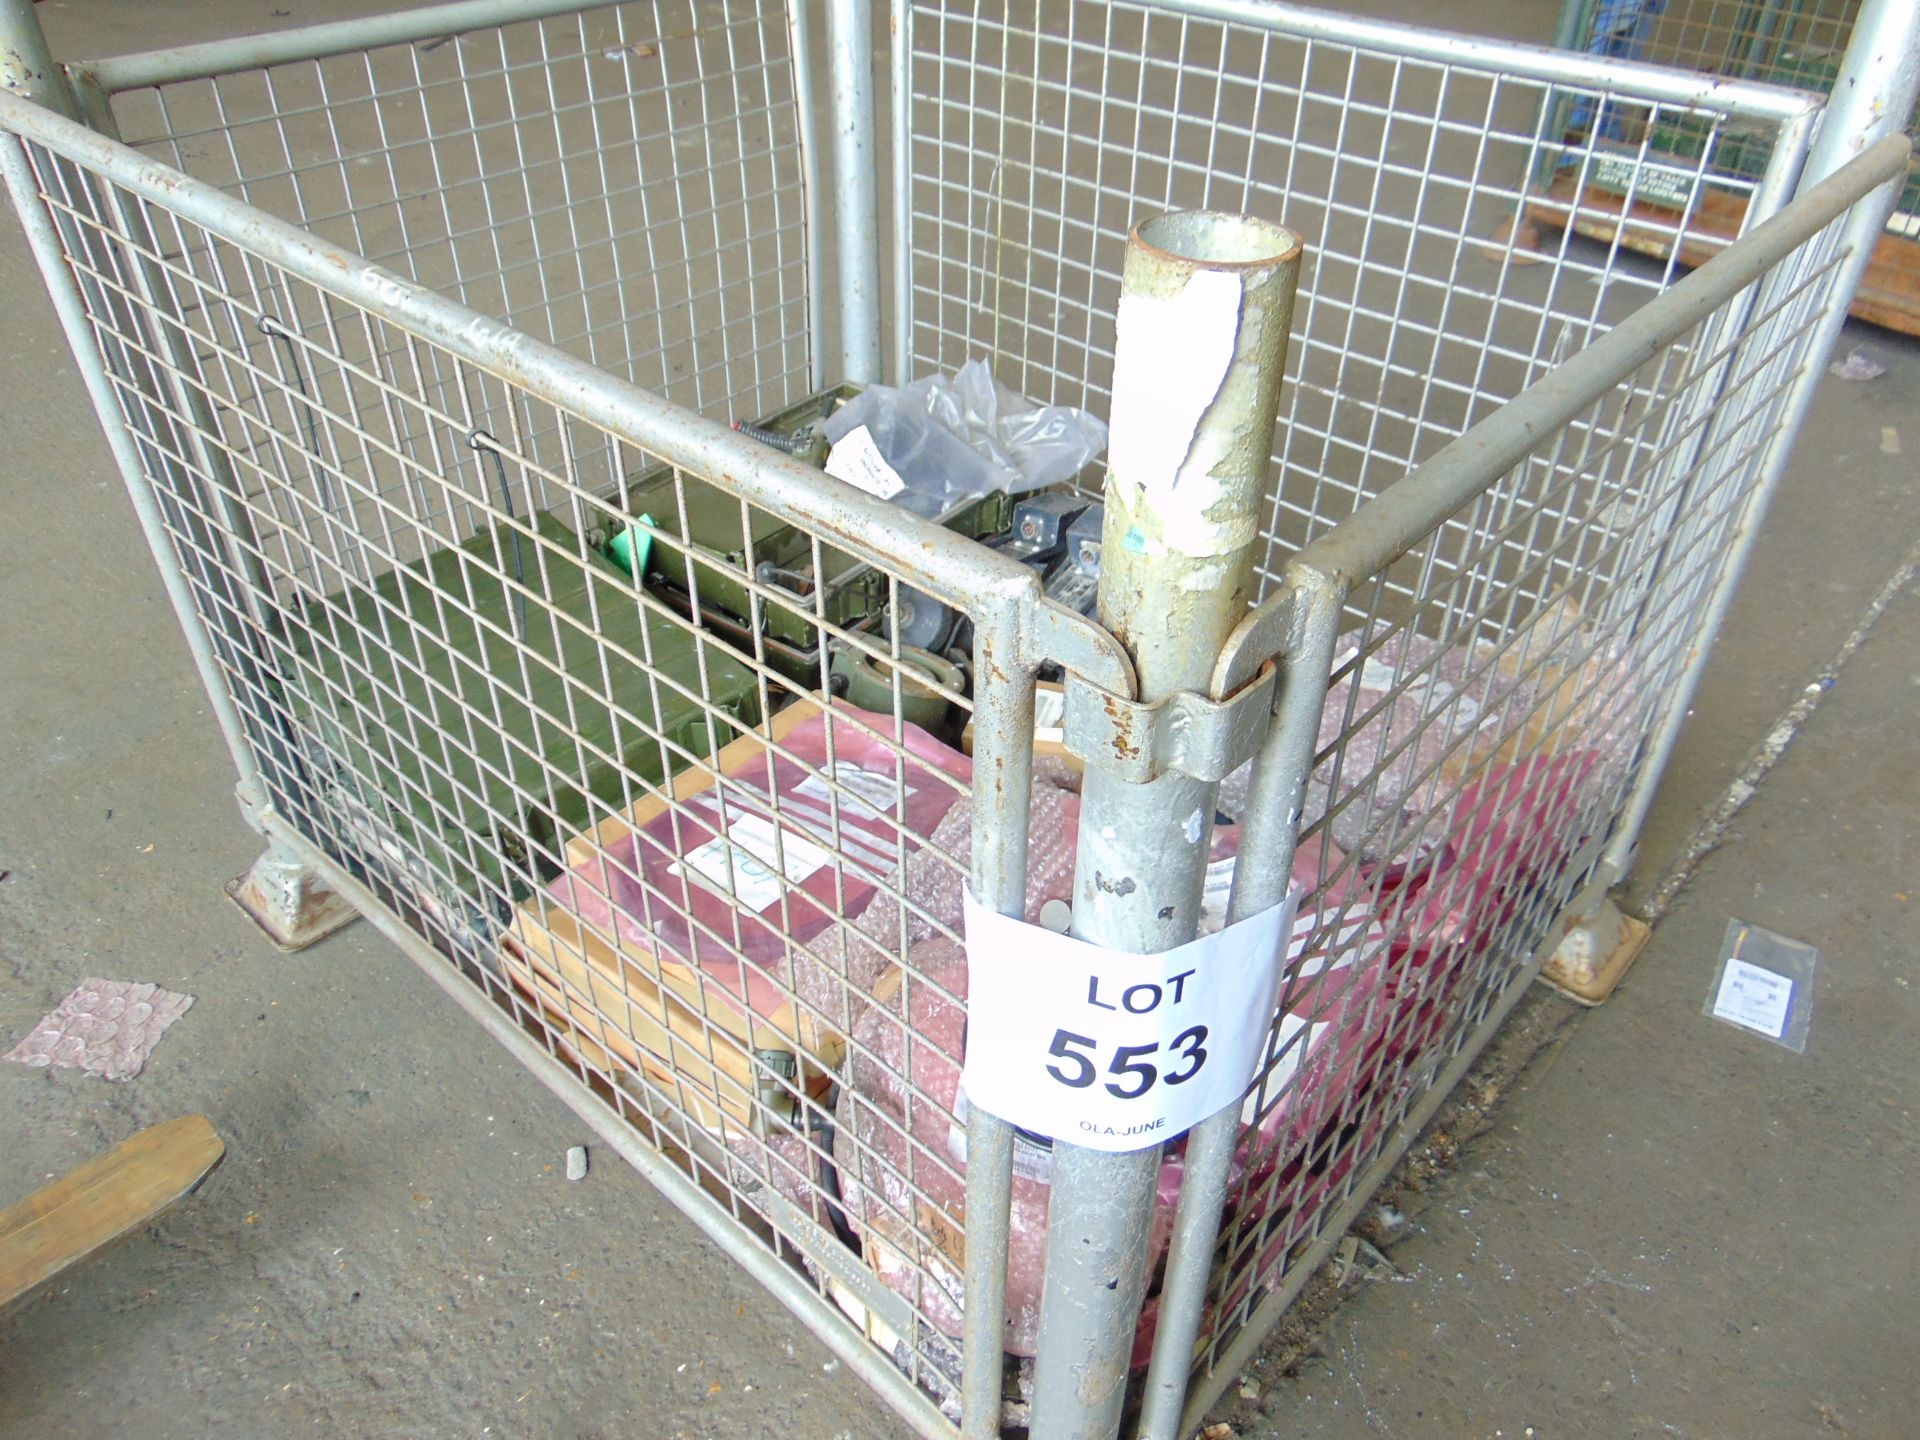 1x Stillage of Clansman Radio Equipment in Cables, Bases, Spares Etc - Image 6 of 6